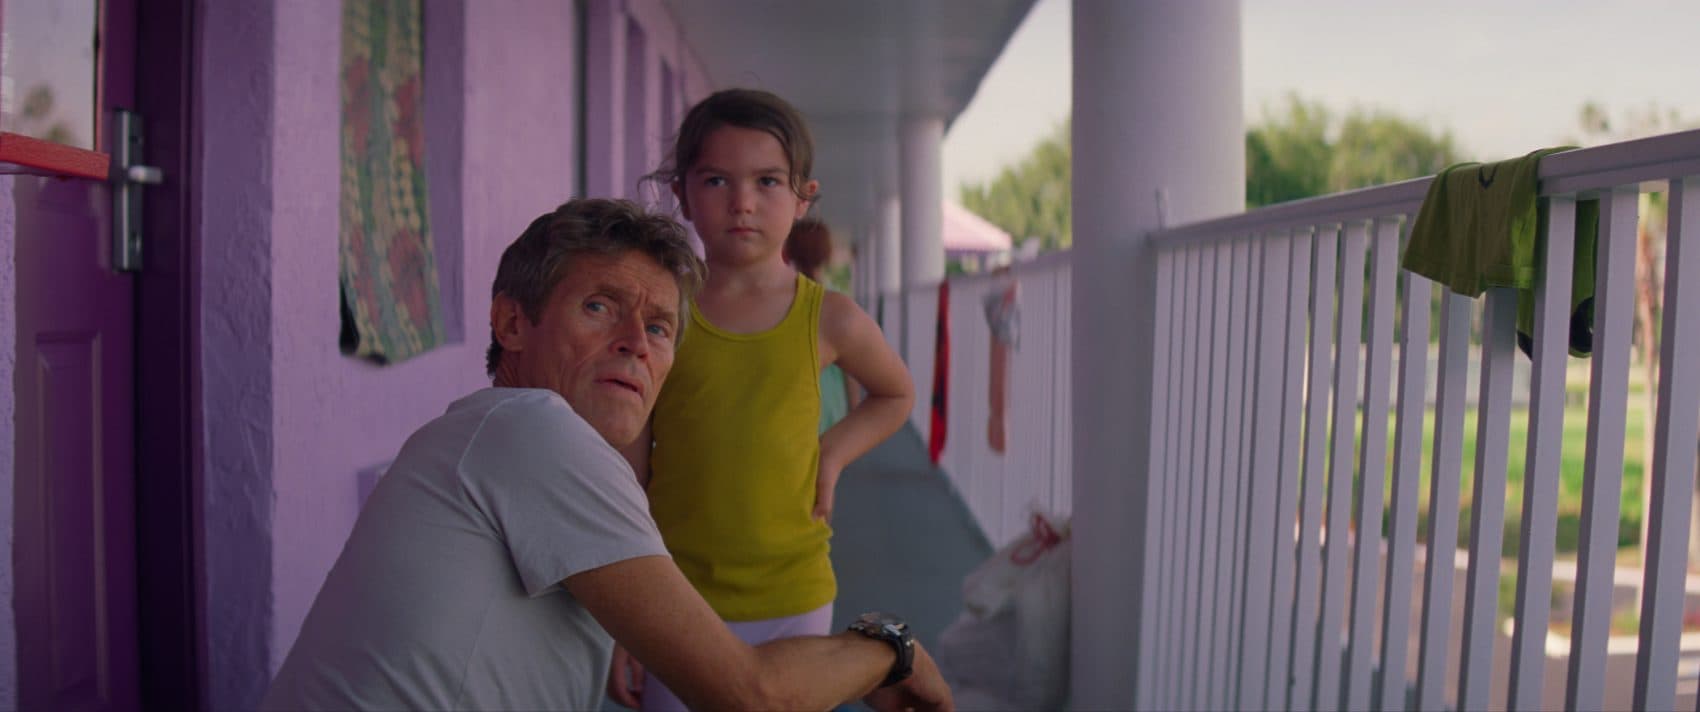 Willem Dafoe and Brooklynn Prince in &quot;The Florida Project.&quot; (Courtesy A24)